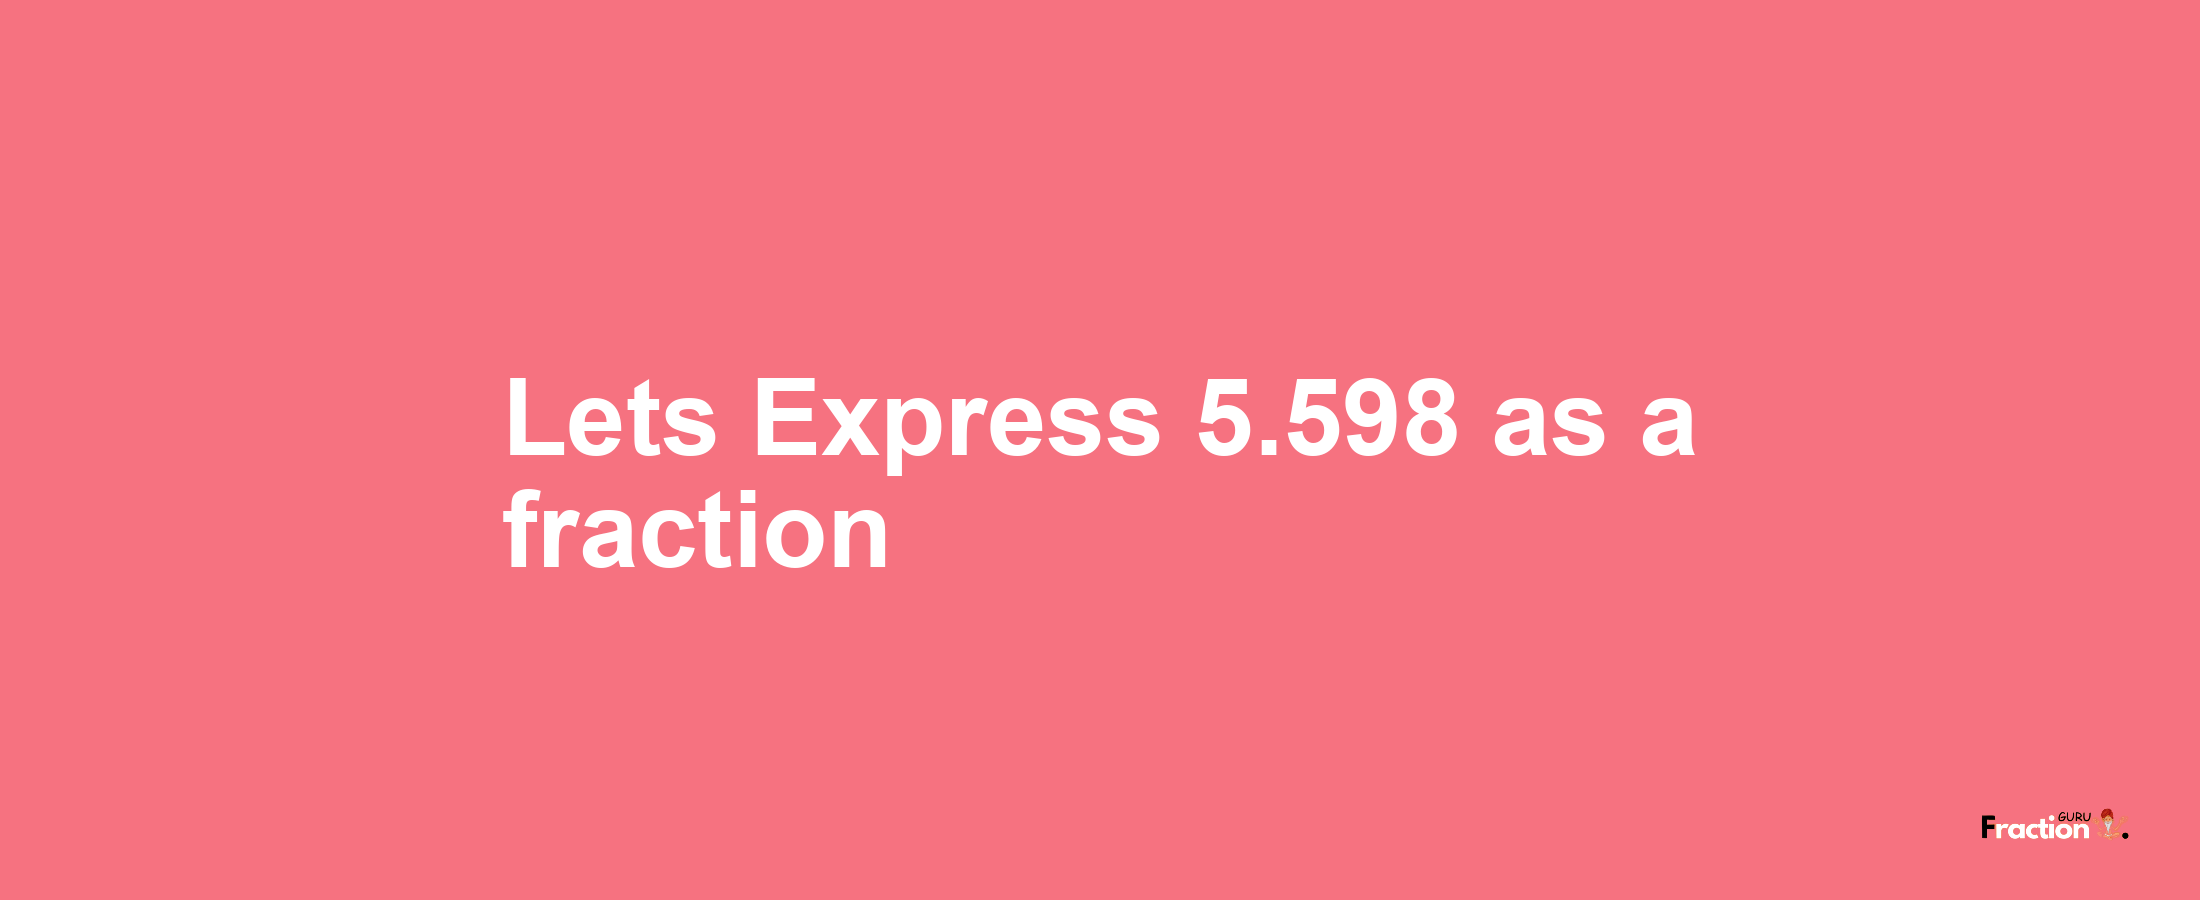 Lets Express 5.598 as afraction